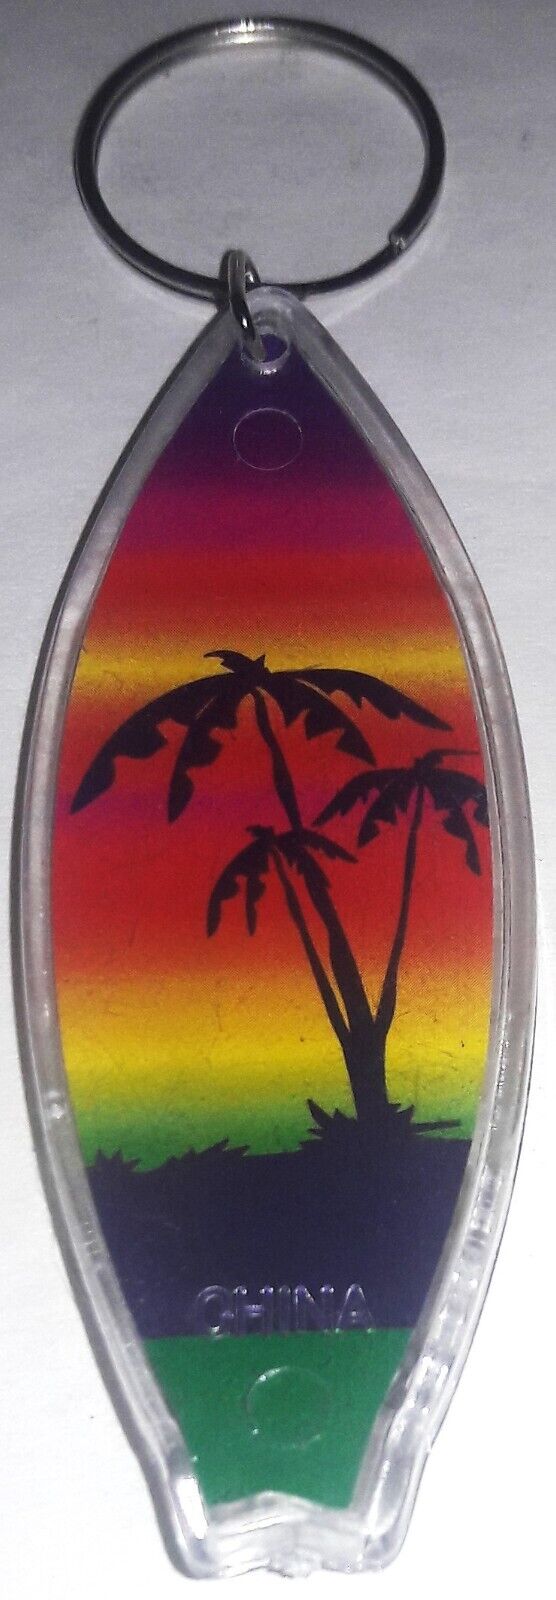 Vintage 90s Surfboard Keychain - Palm Trees / Sunset / BRAND NEW